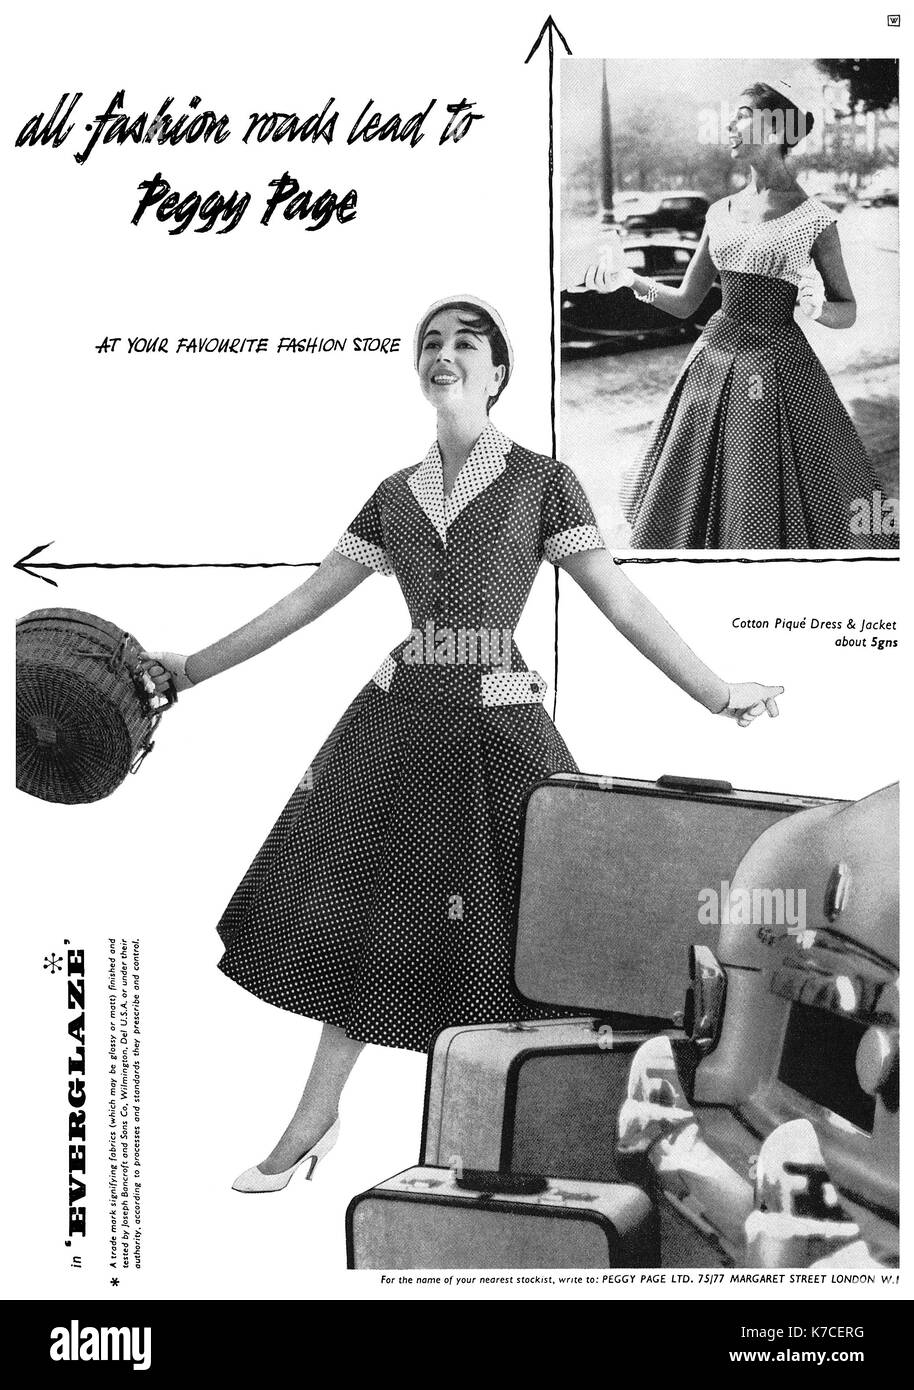 1956 British advertisement for Peggy Page fashions. Stock Photo